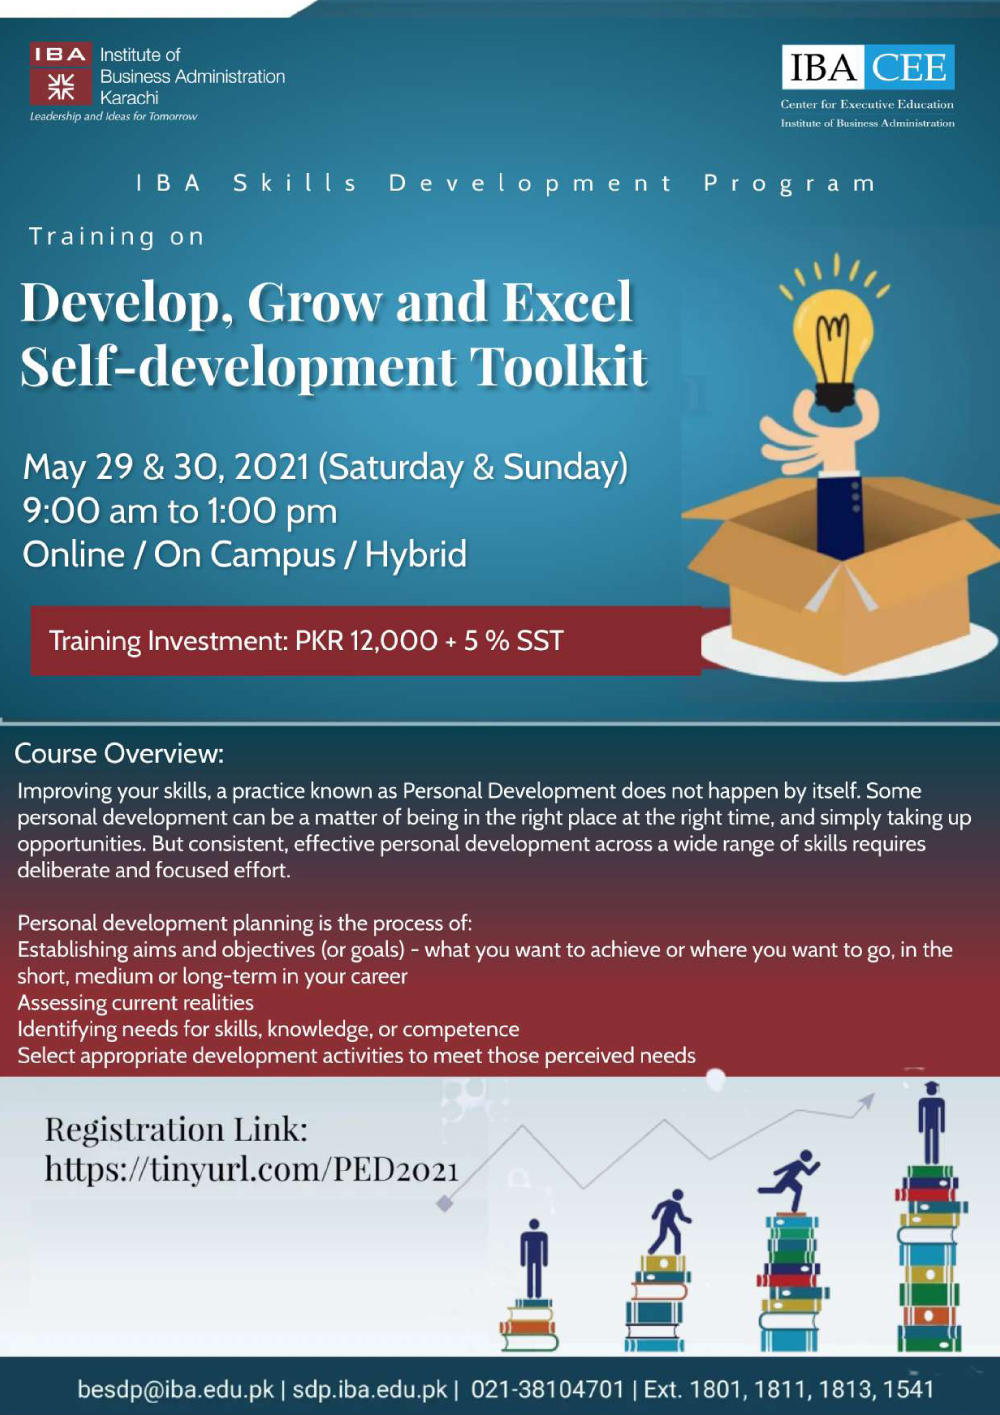 Develop, Grow and Excel - Self-development Toolkit 